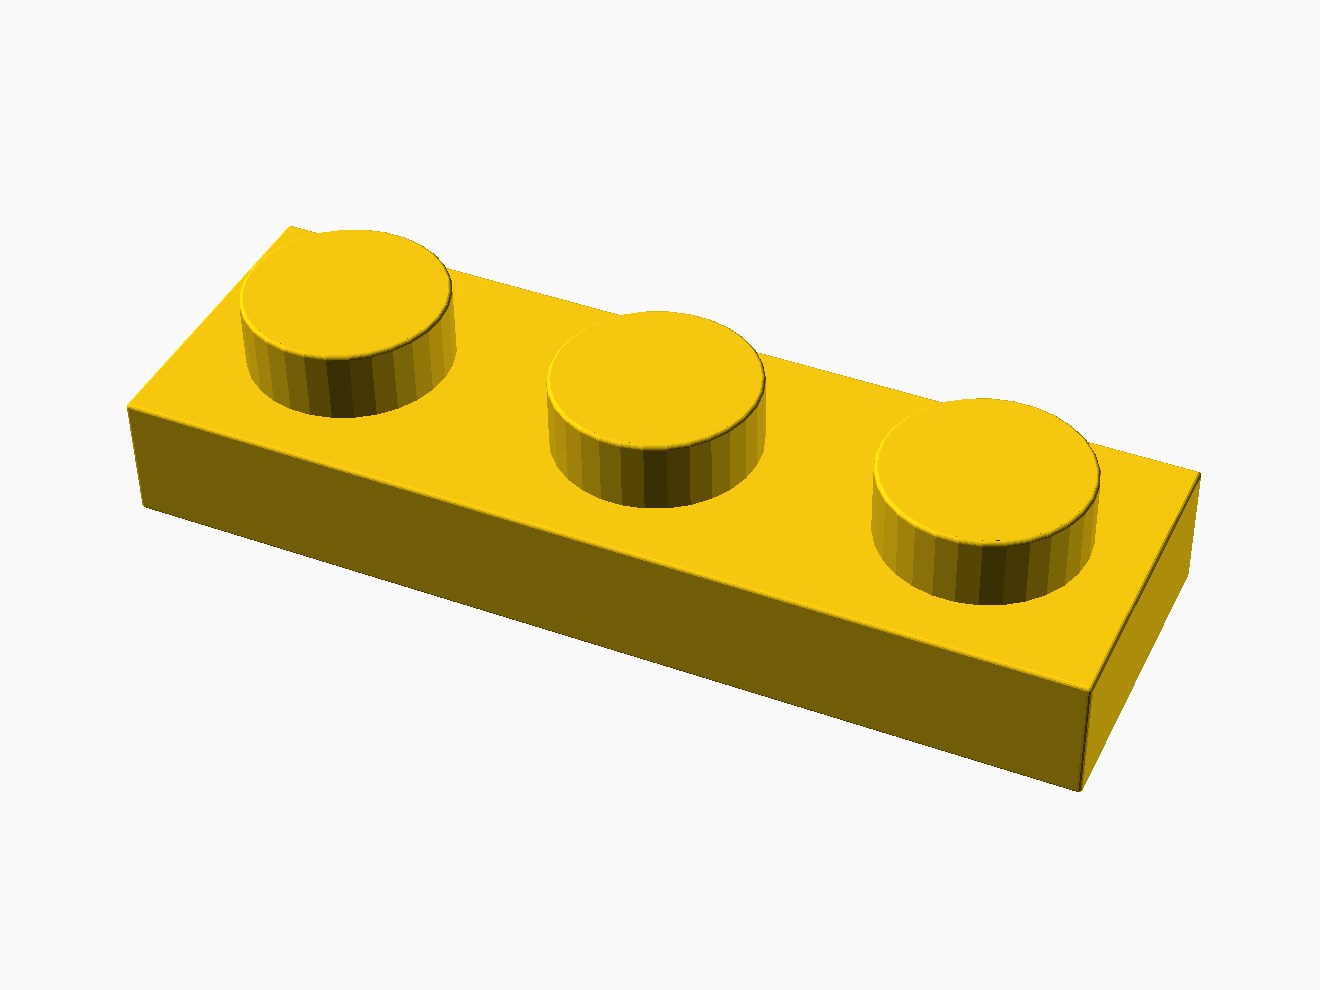 3D printable model of a LEGO 3x1 Plate with standard knobs.